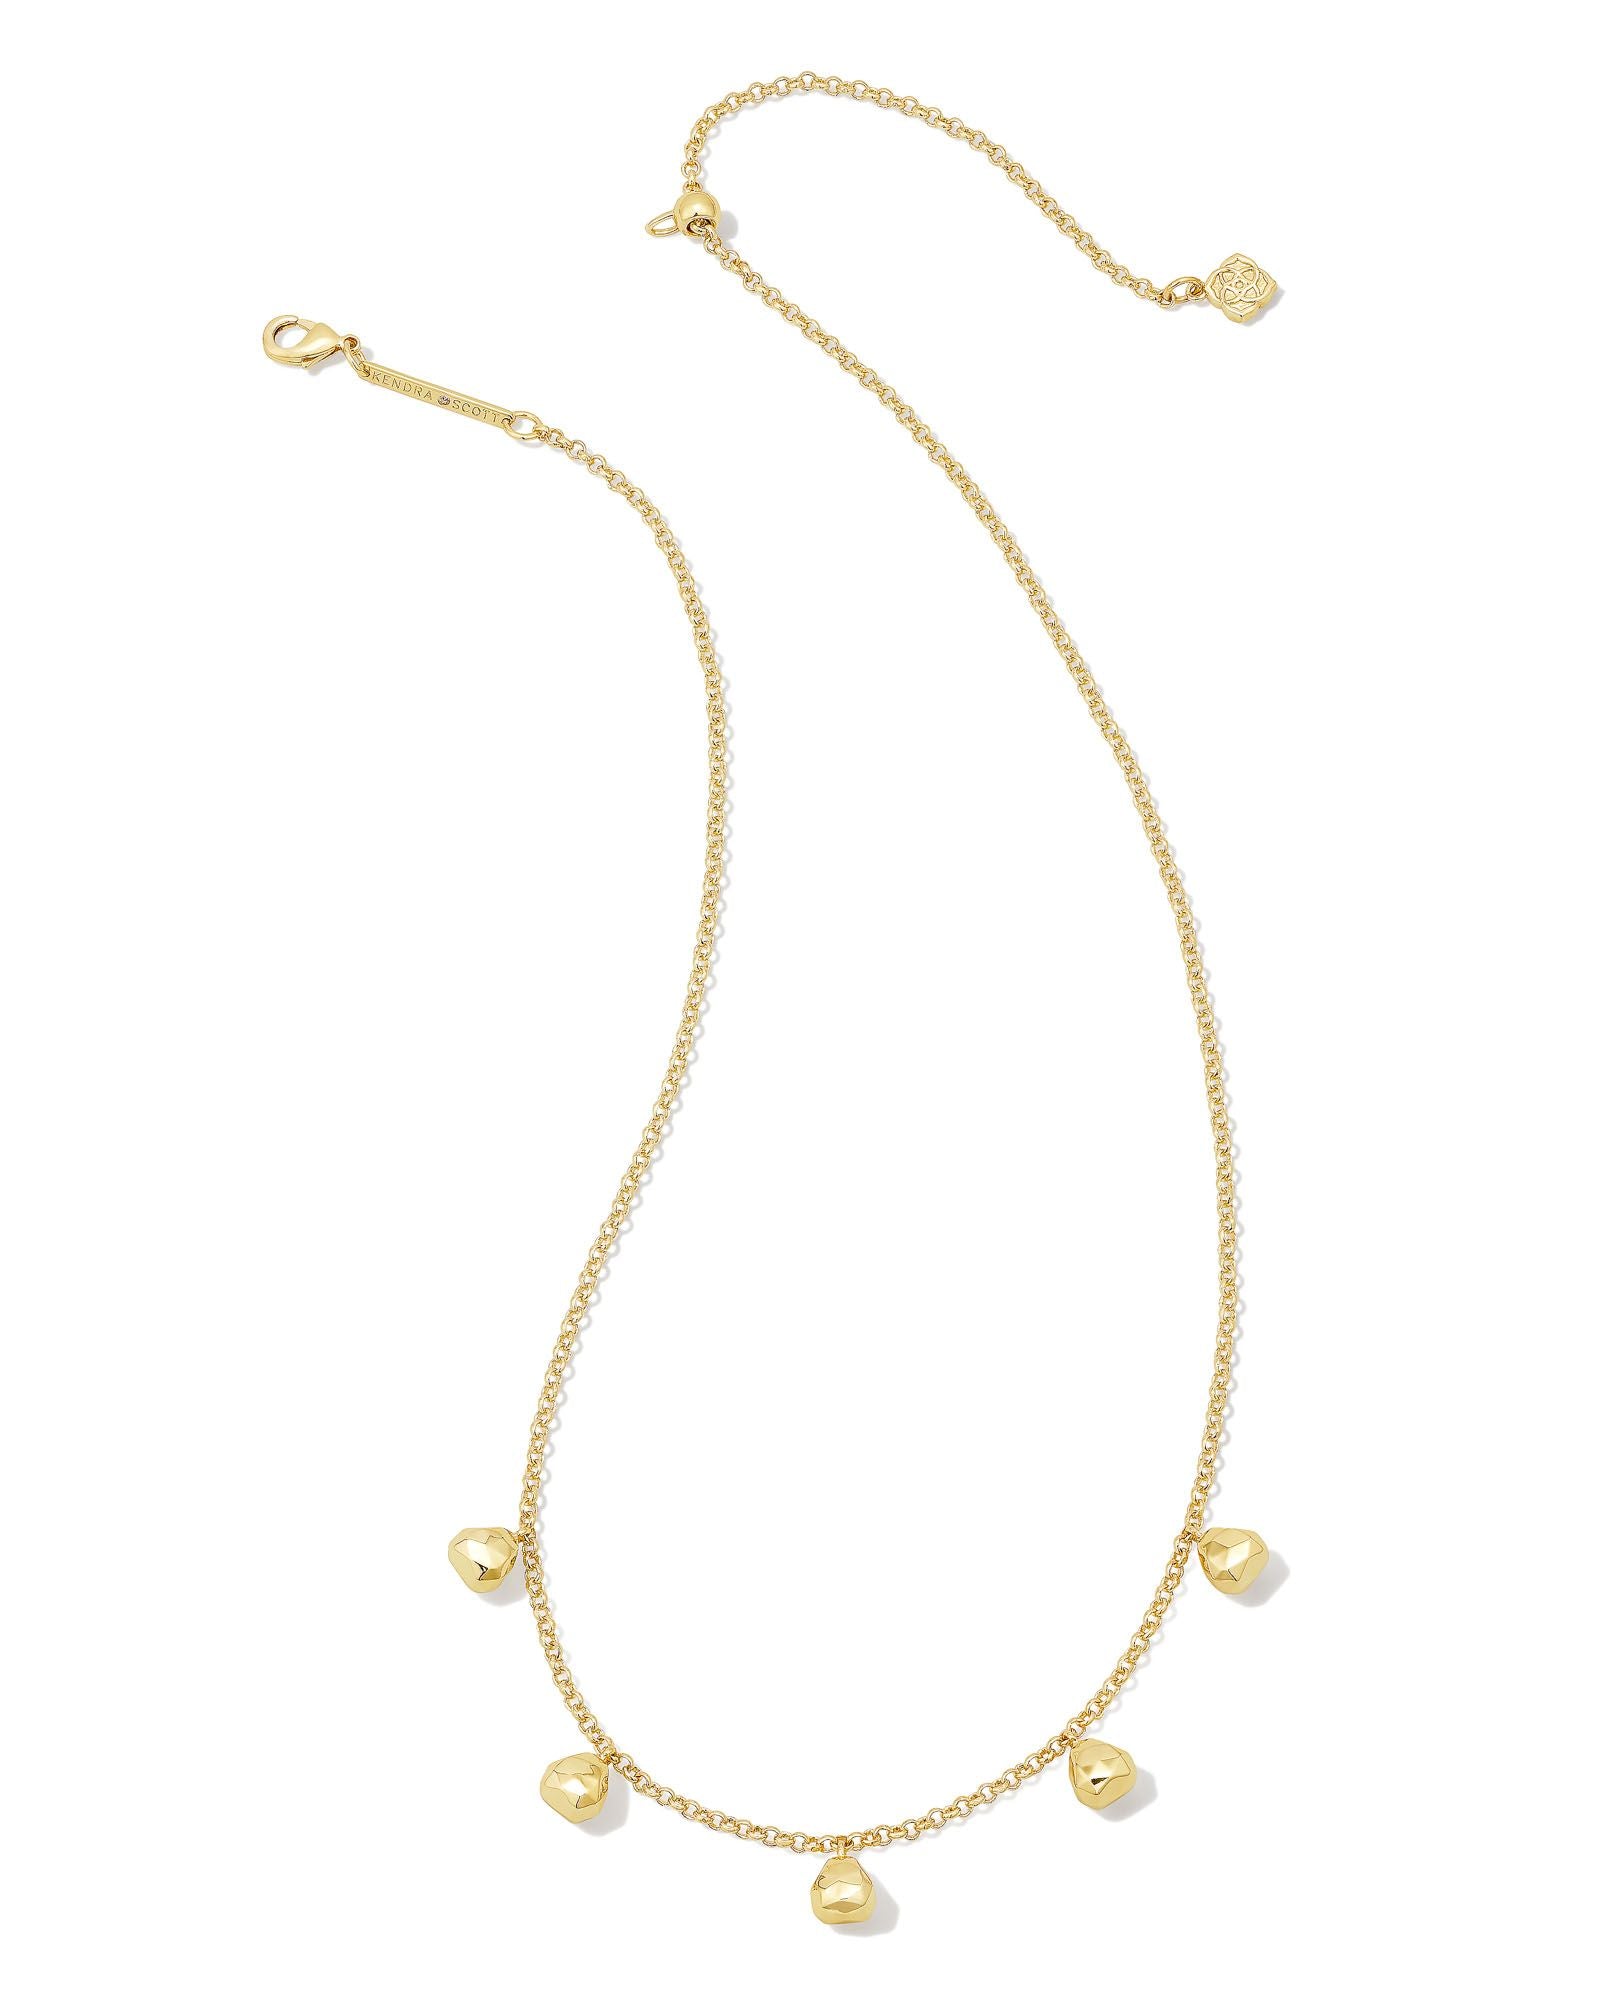 Sale Gabby Strand Necklace Gold or Silver